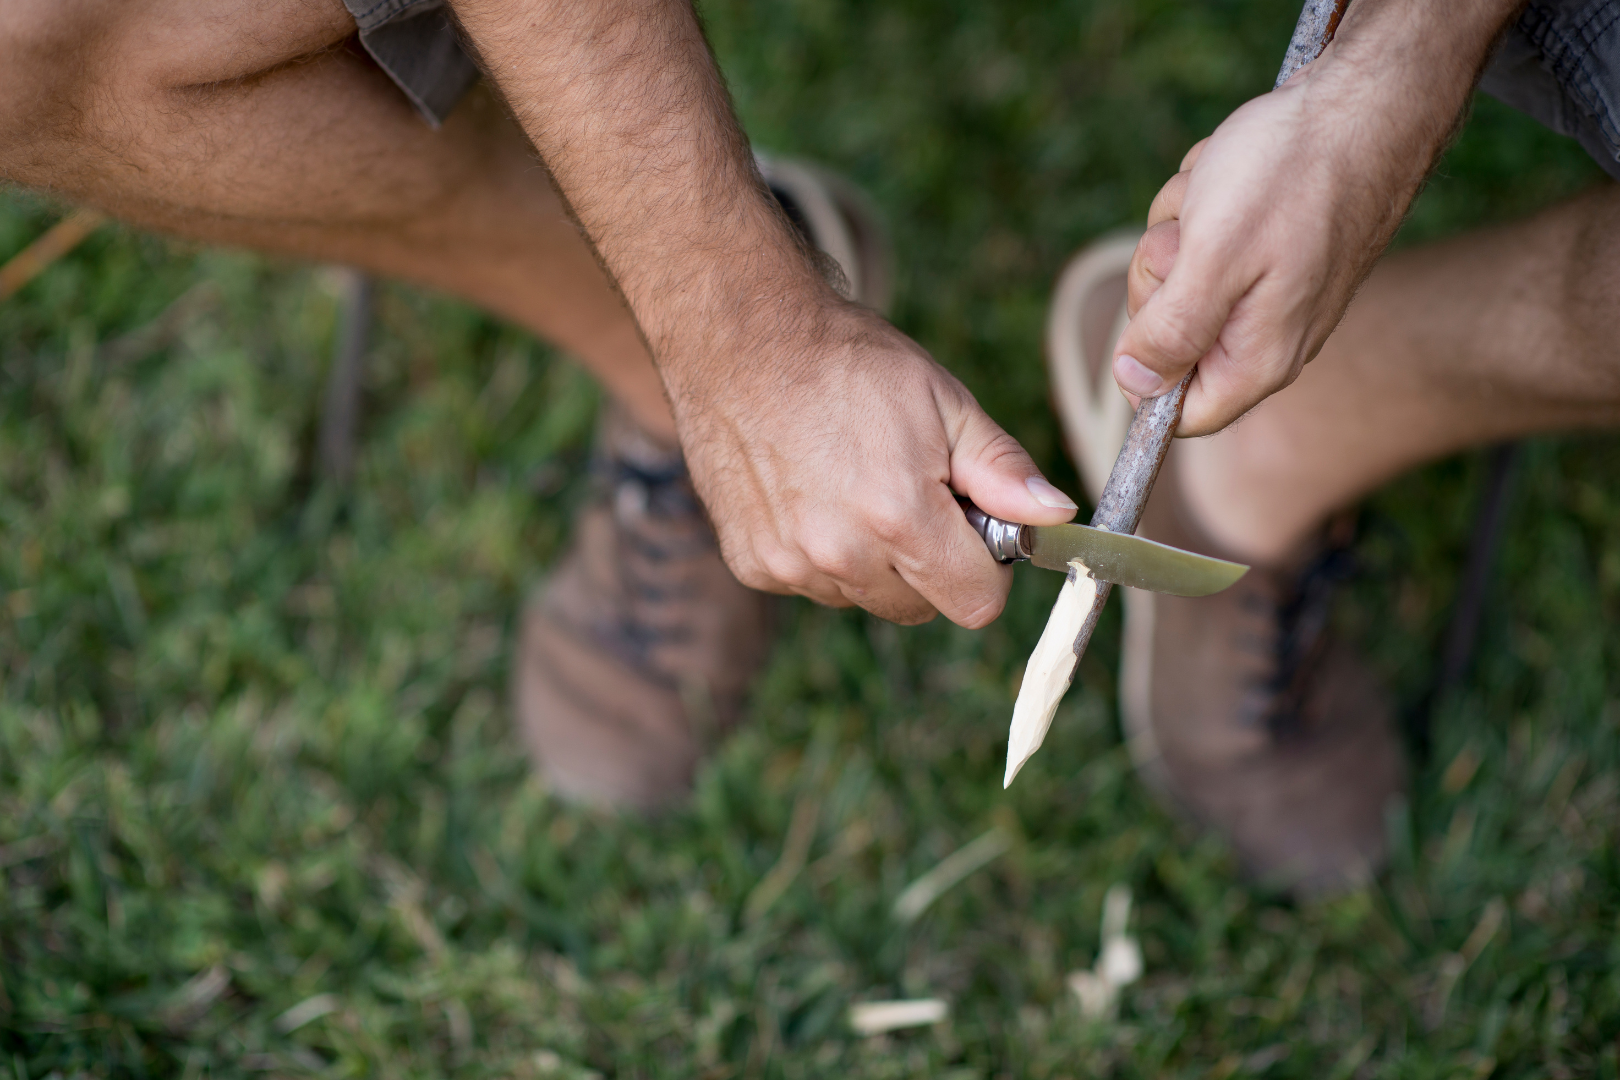 whittling a wooden stick into a pointed utensil